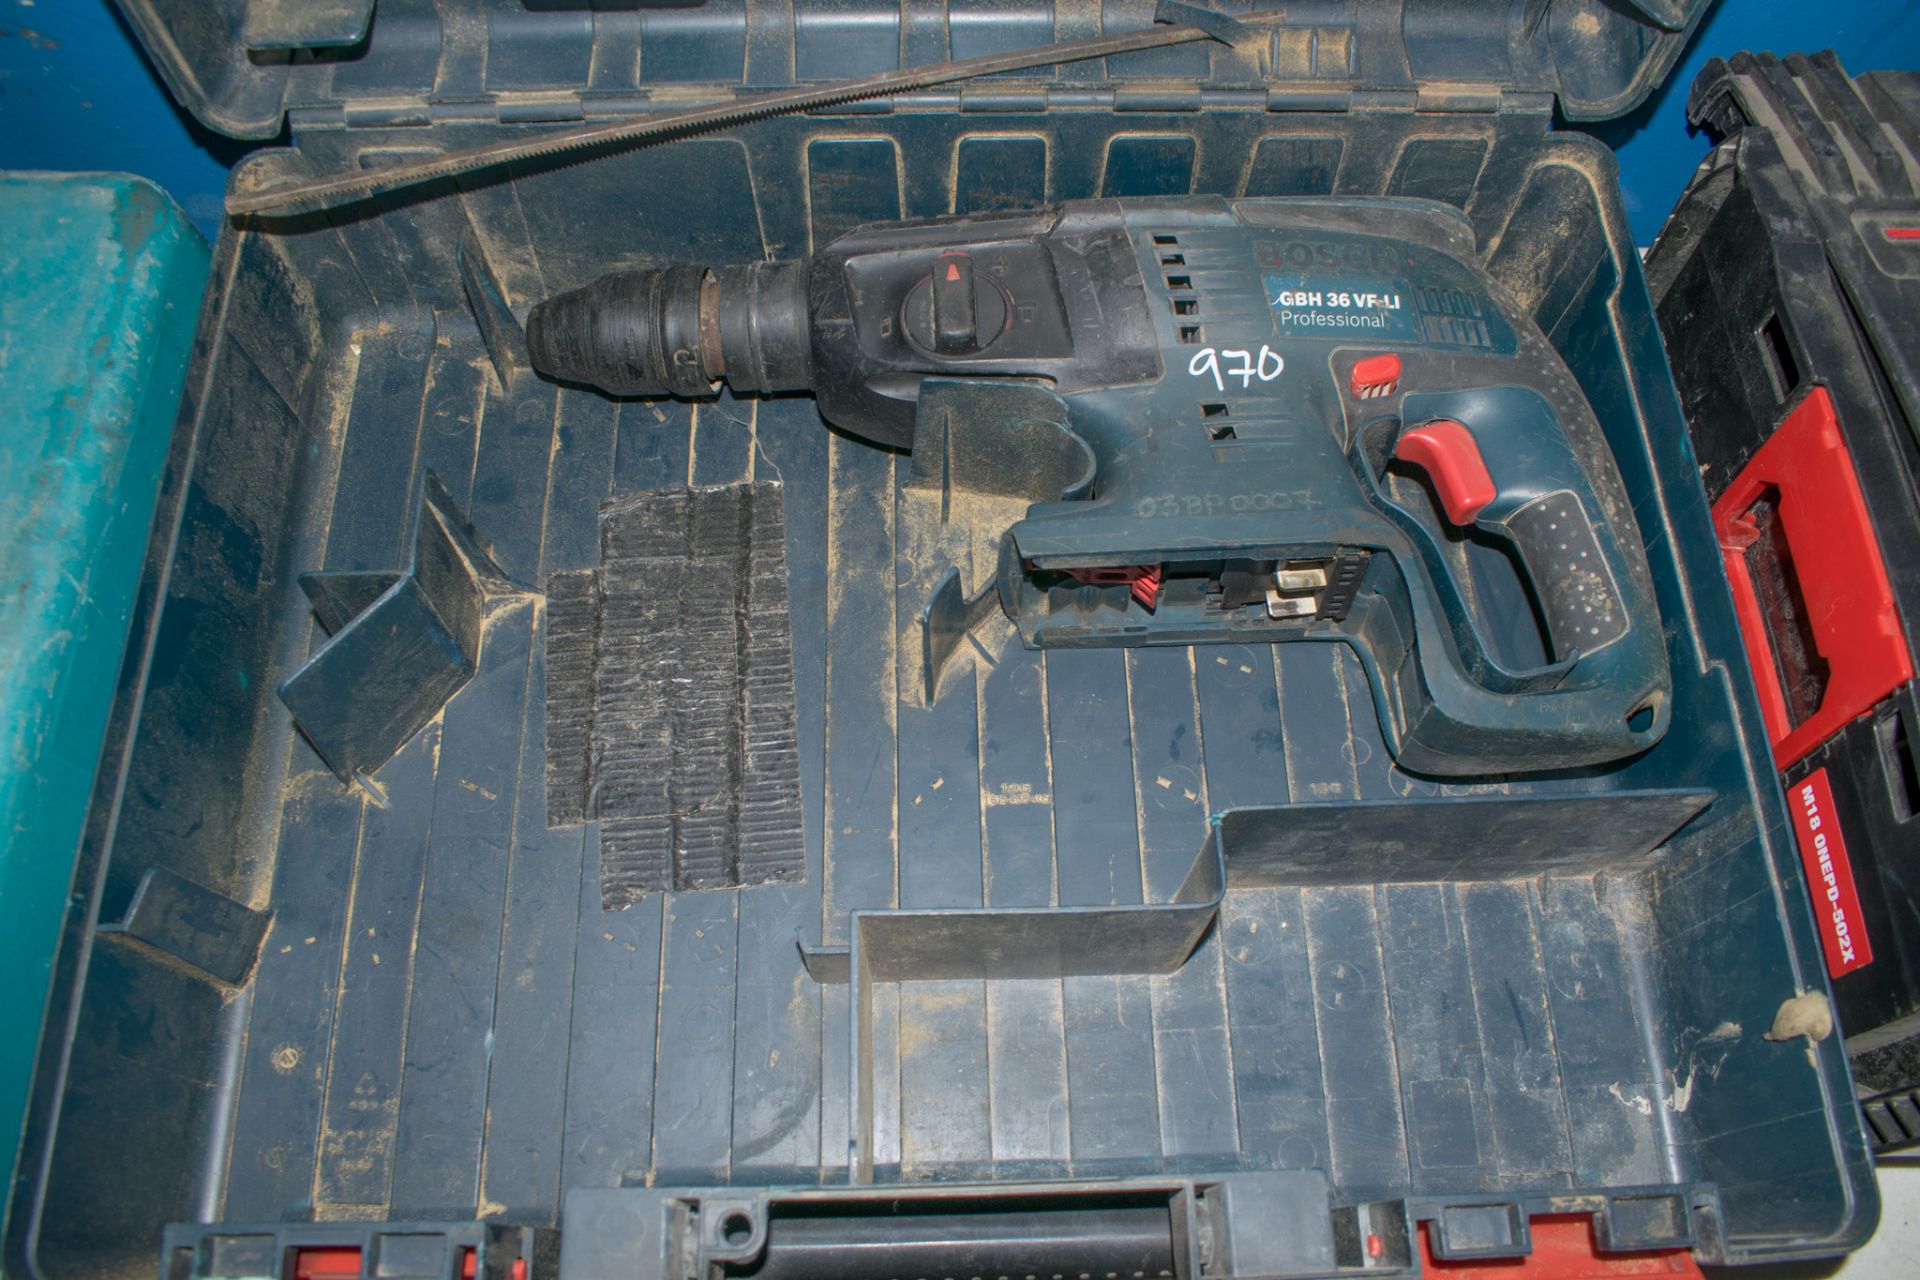 Bosch 36v cordless hammer drill c/w carry case ** No battery or charger **